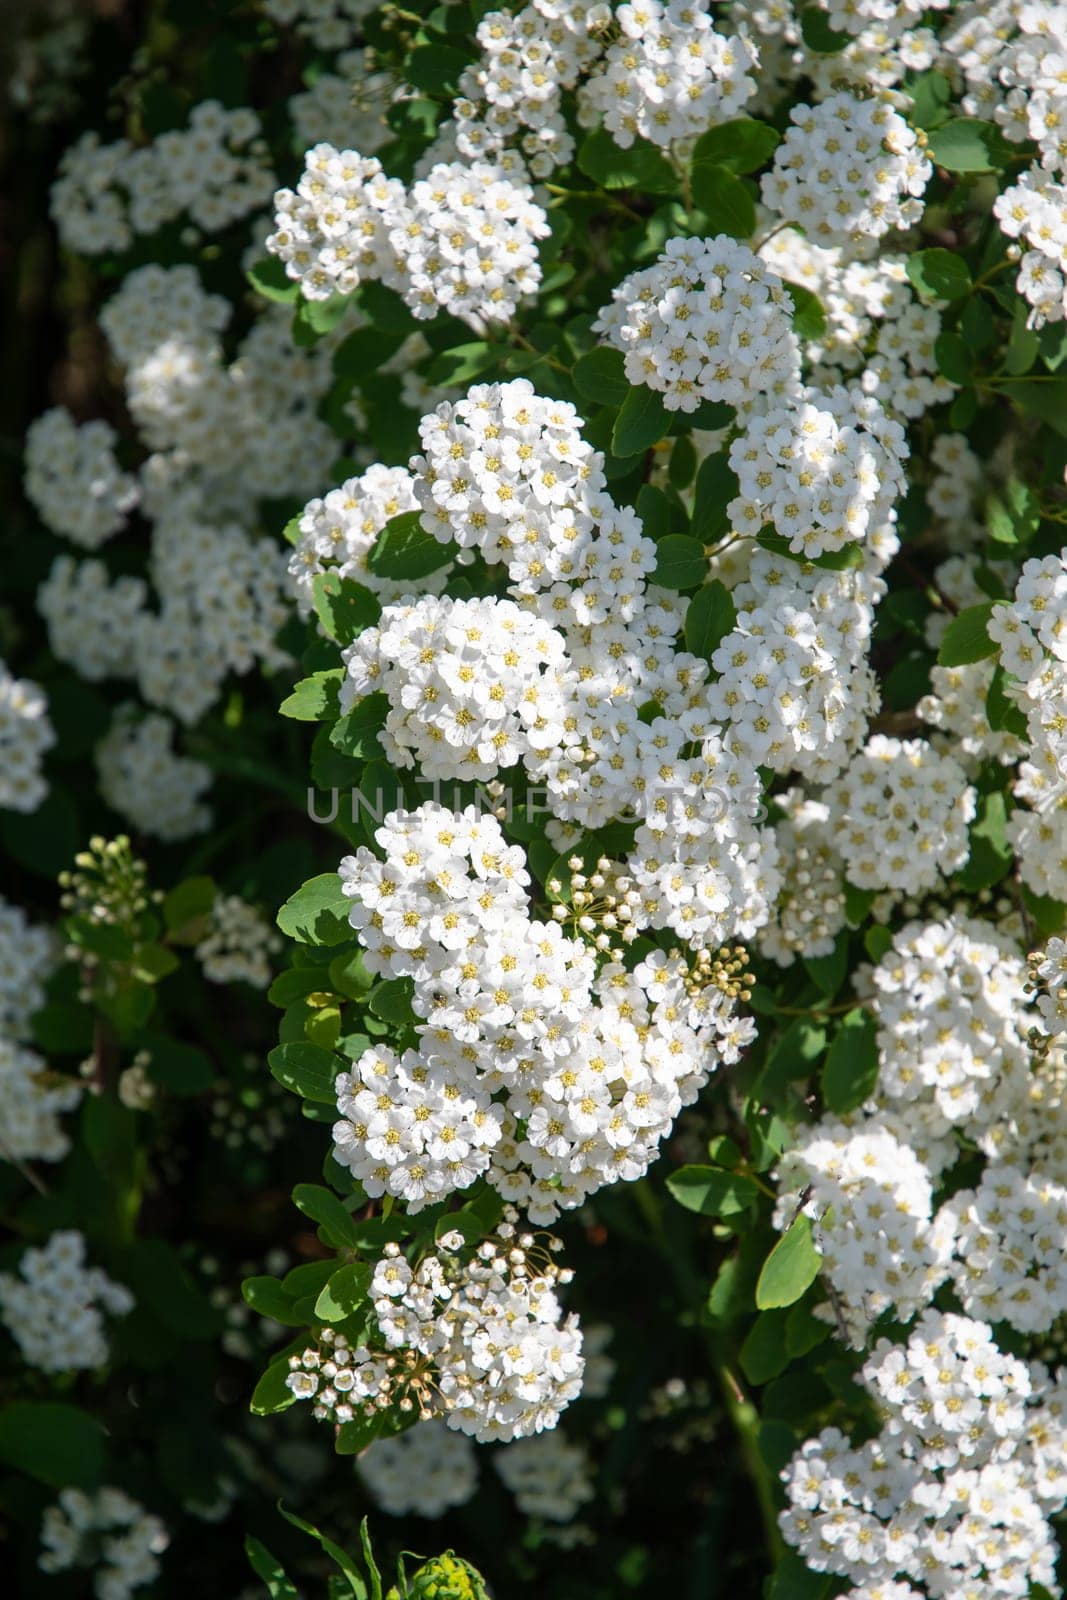 Blooming spirea bush, small white flowers in round inflorescences, Branches of a bush in white bloom, natural floral by KaterinaDalemans